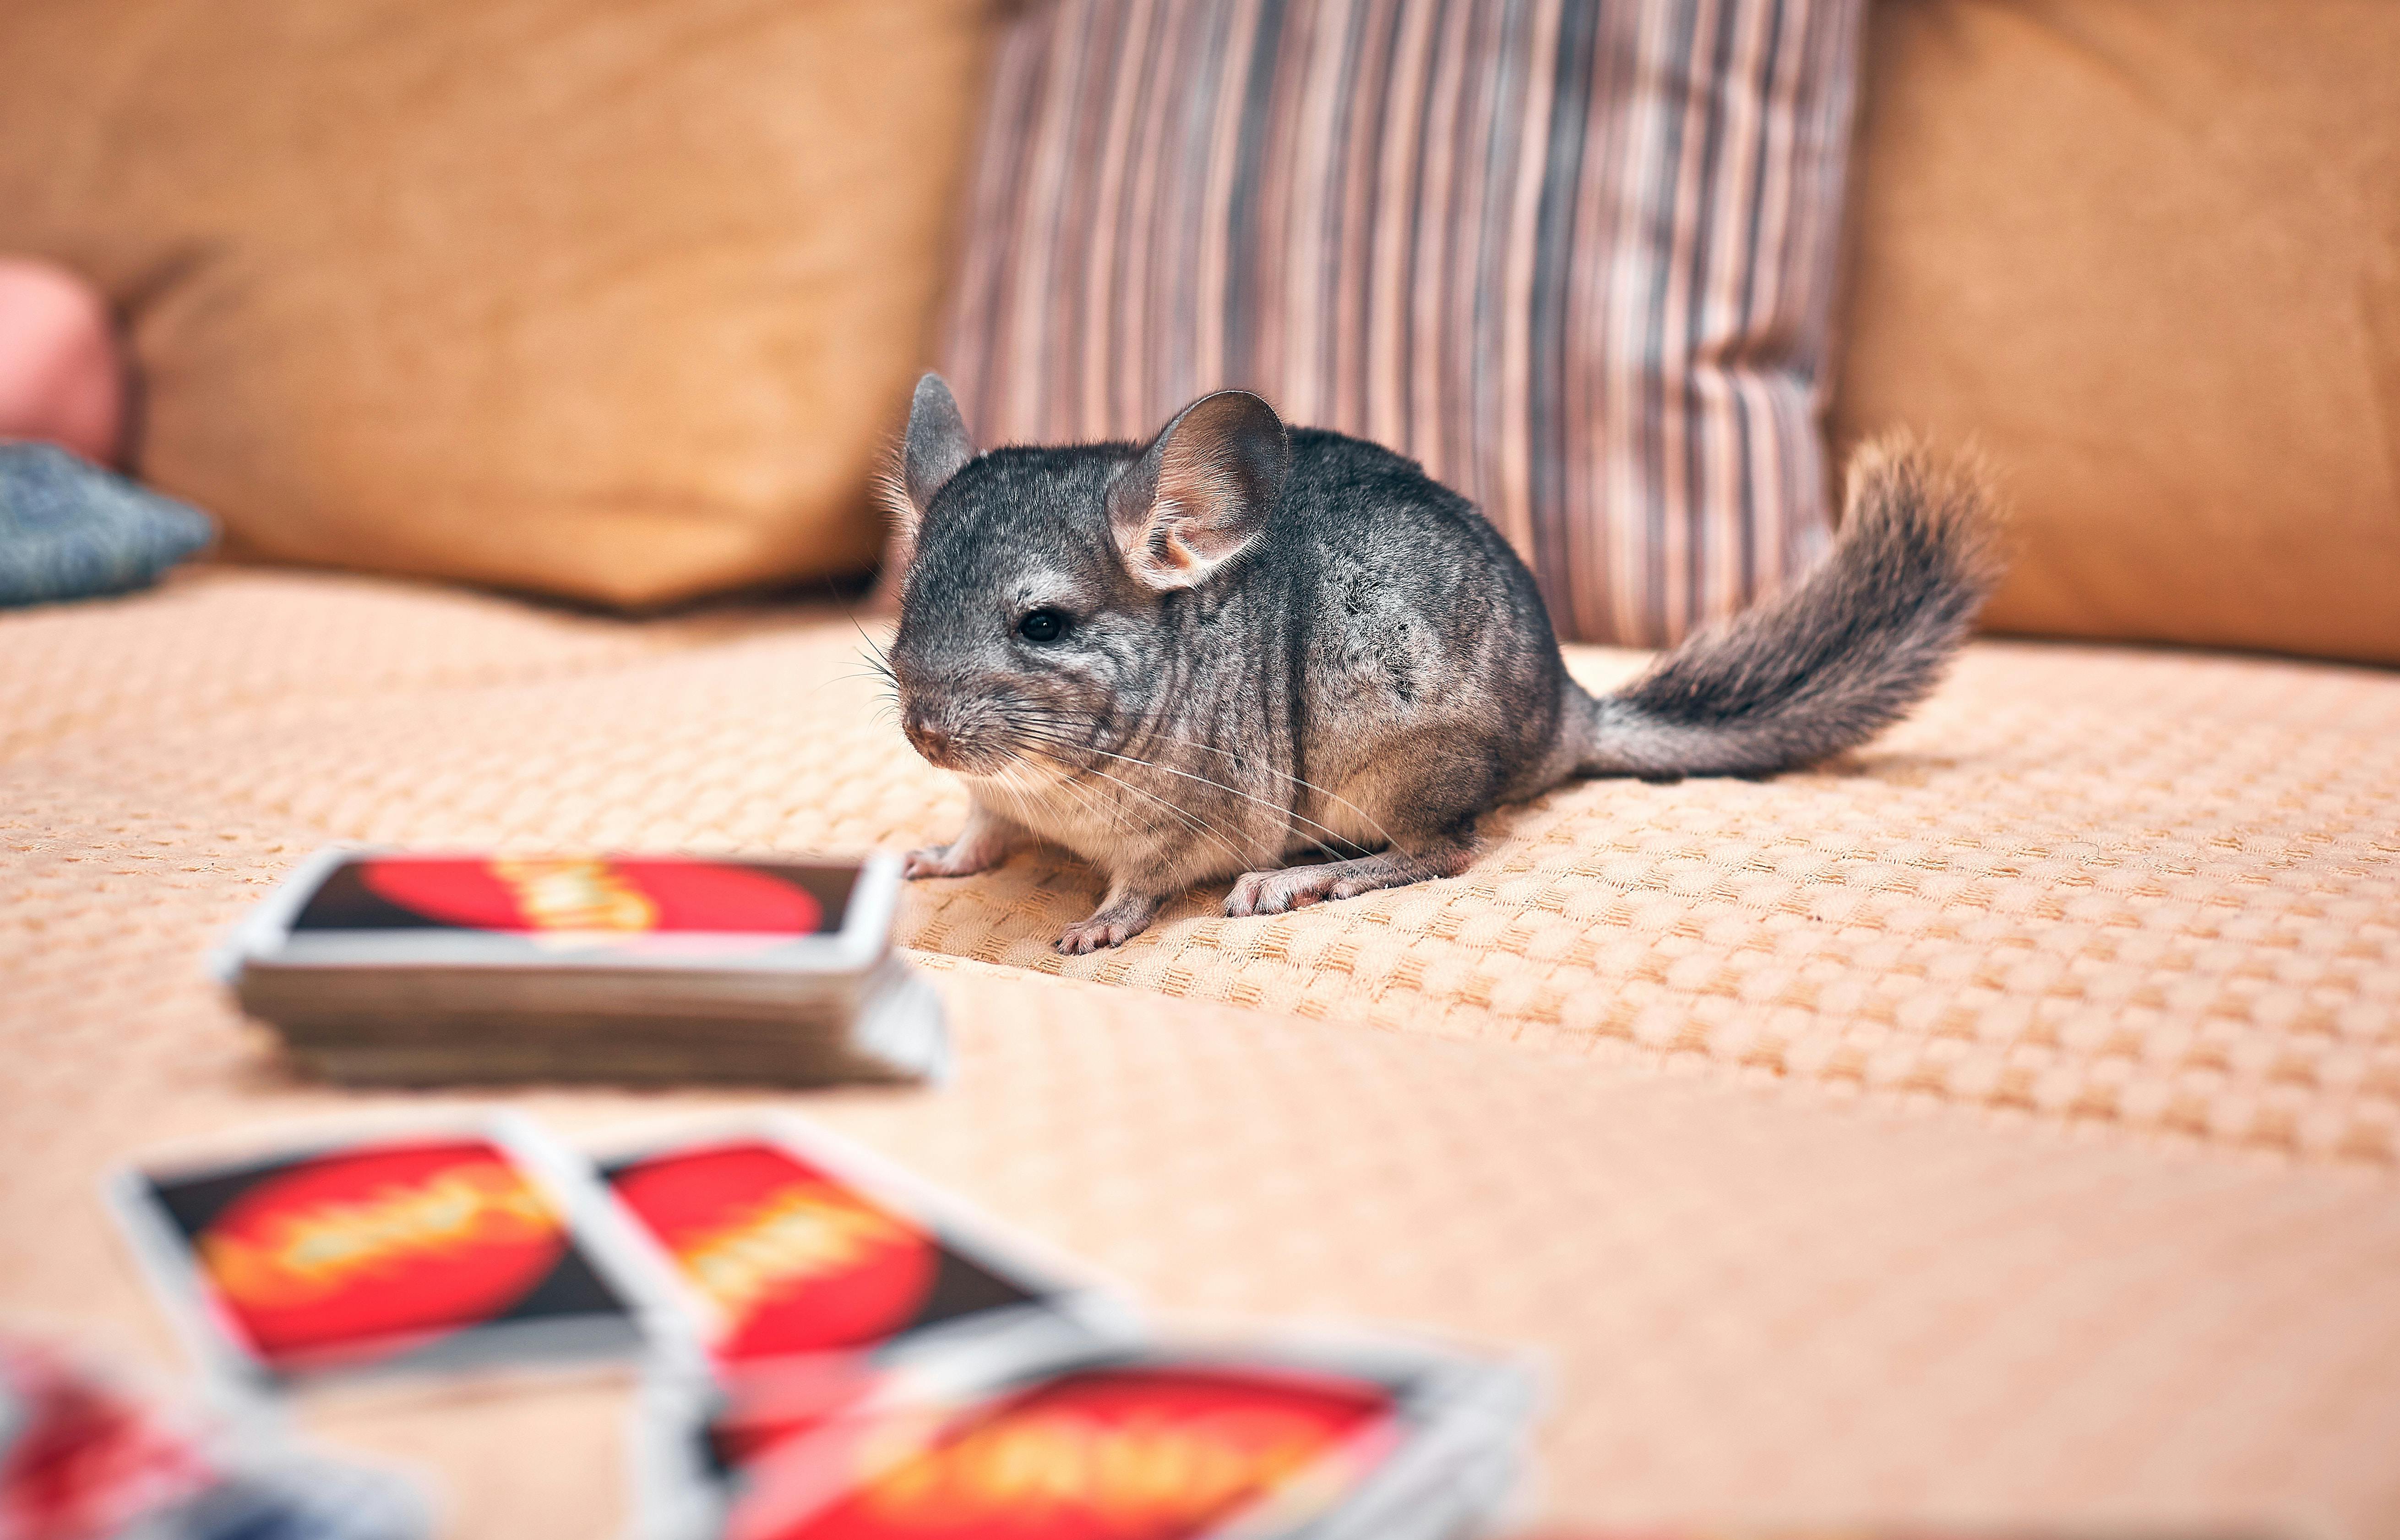 pexels photo 4547058.jpeg?cs=srgb&dl=pexels bulat khamitov 4547058 Chin-tastic! Discover the Top 10 Most Adorable Names for Your Furry Friend - The Chinchilla!